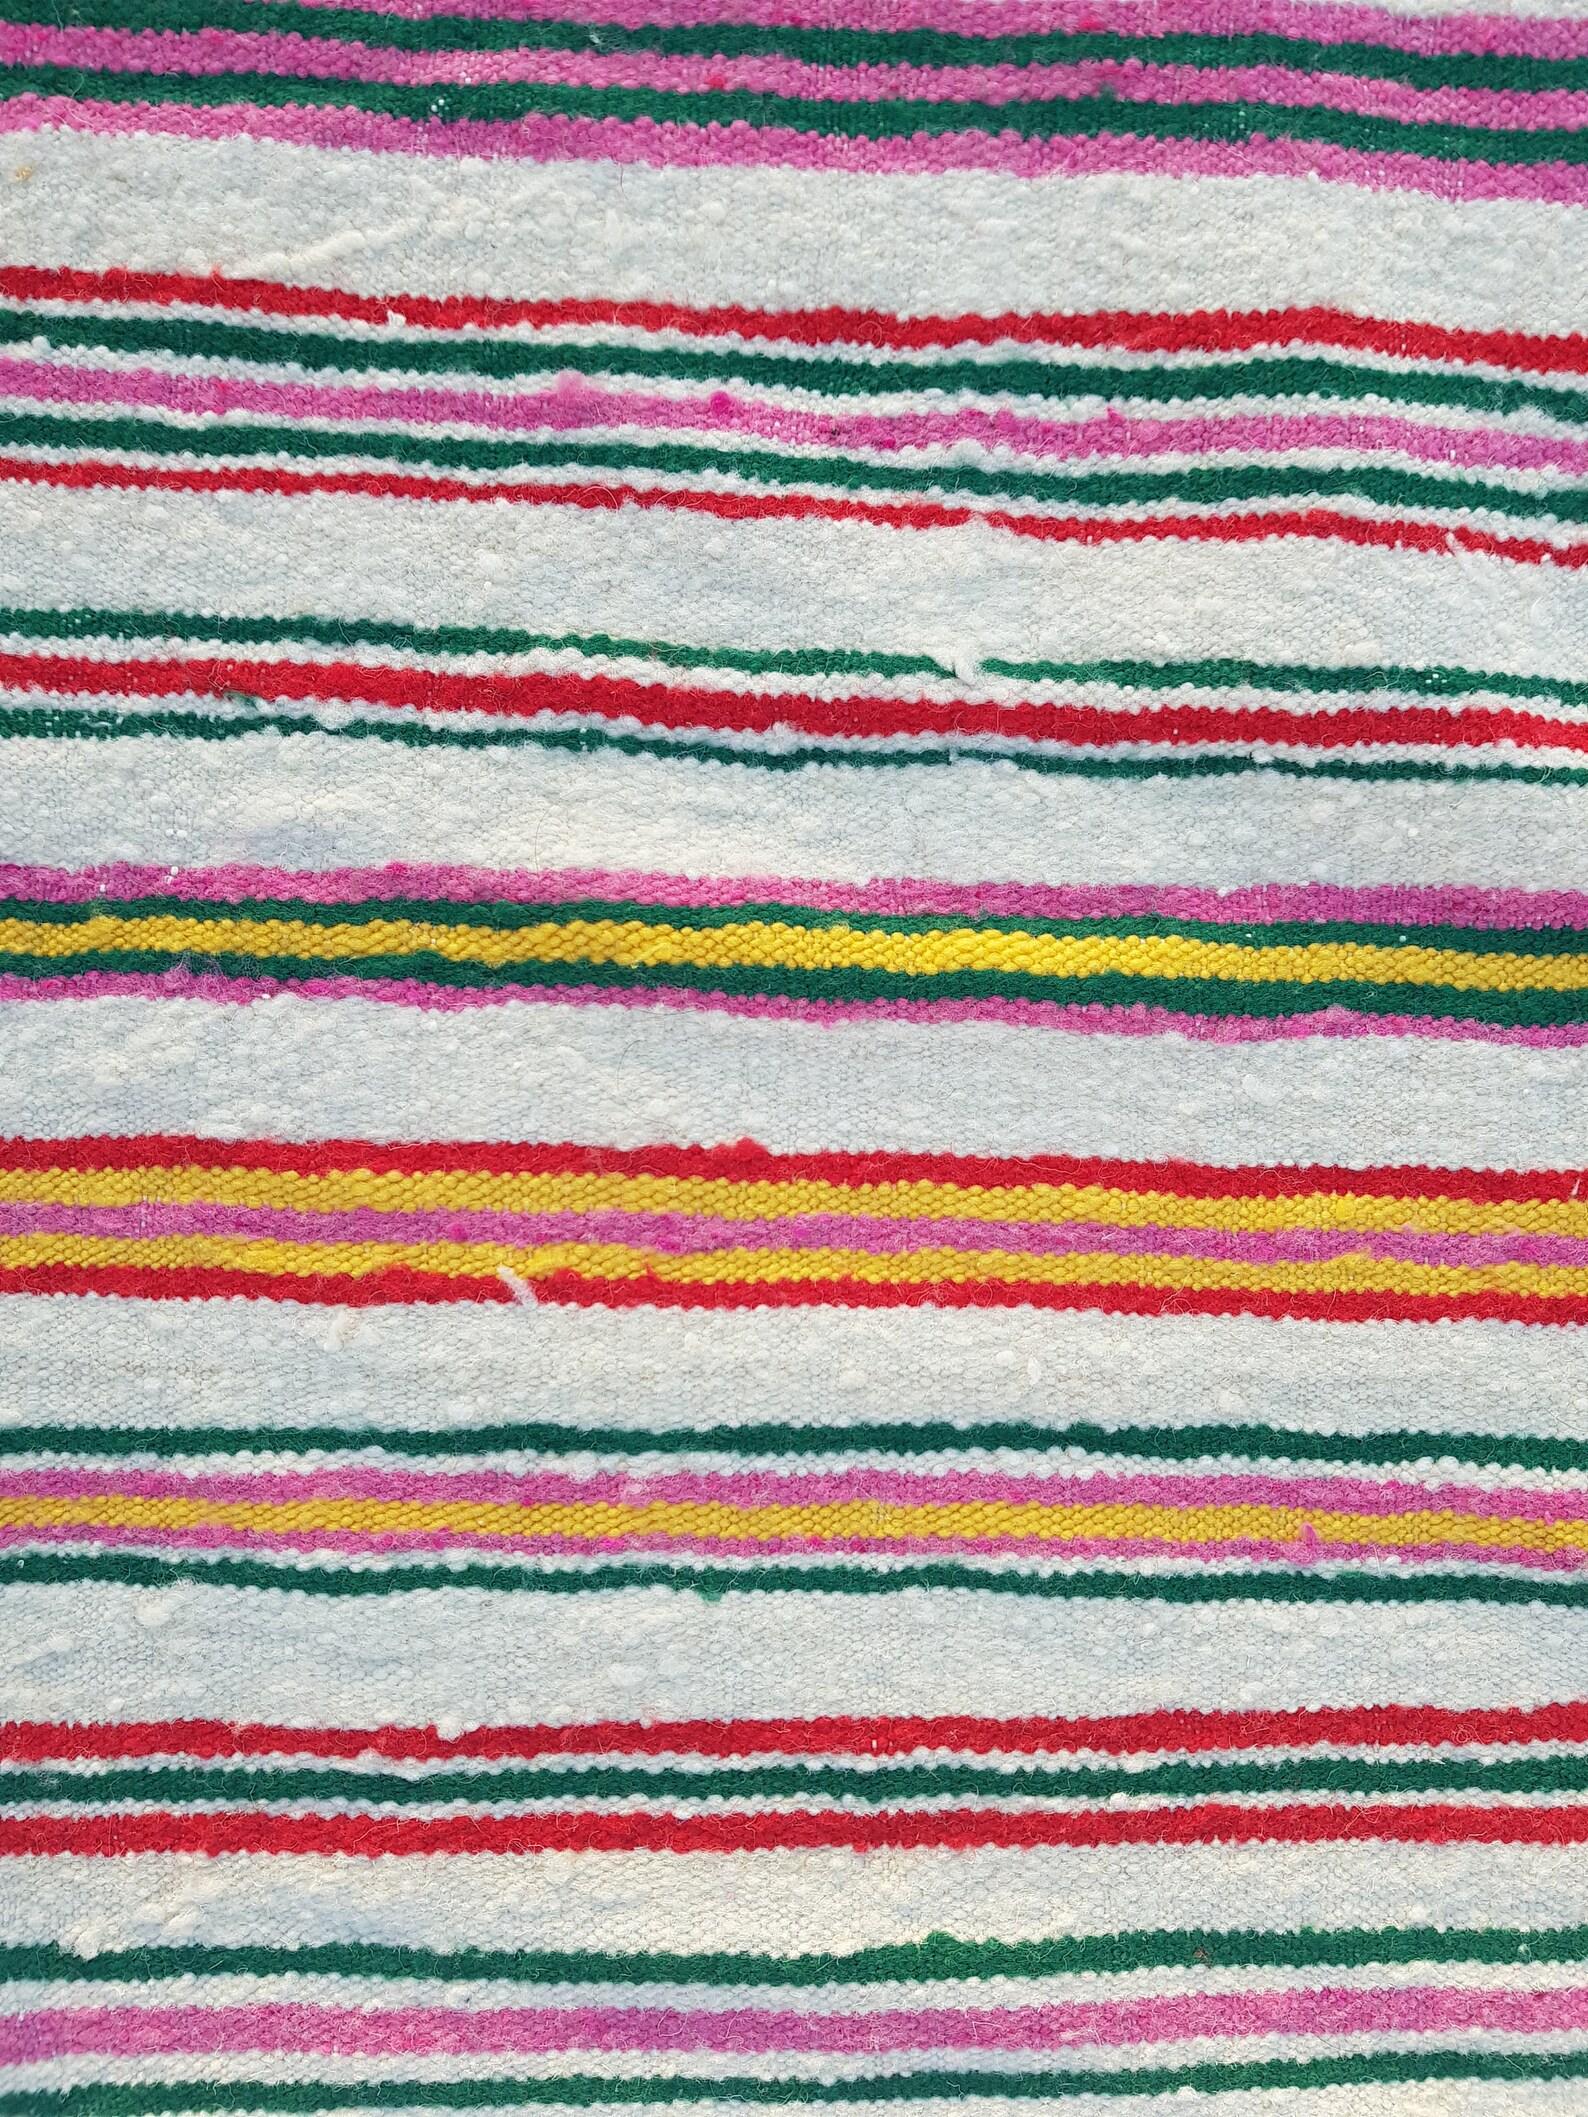 This handwoven Algerian Berber rug is a beautiful piece of craftsmanship with a simple stripped design and vibrant colors. This generous size rug features stripes of various colors such as red, yellow, green and many more all set against a beige